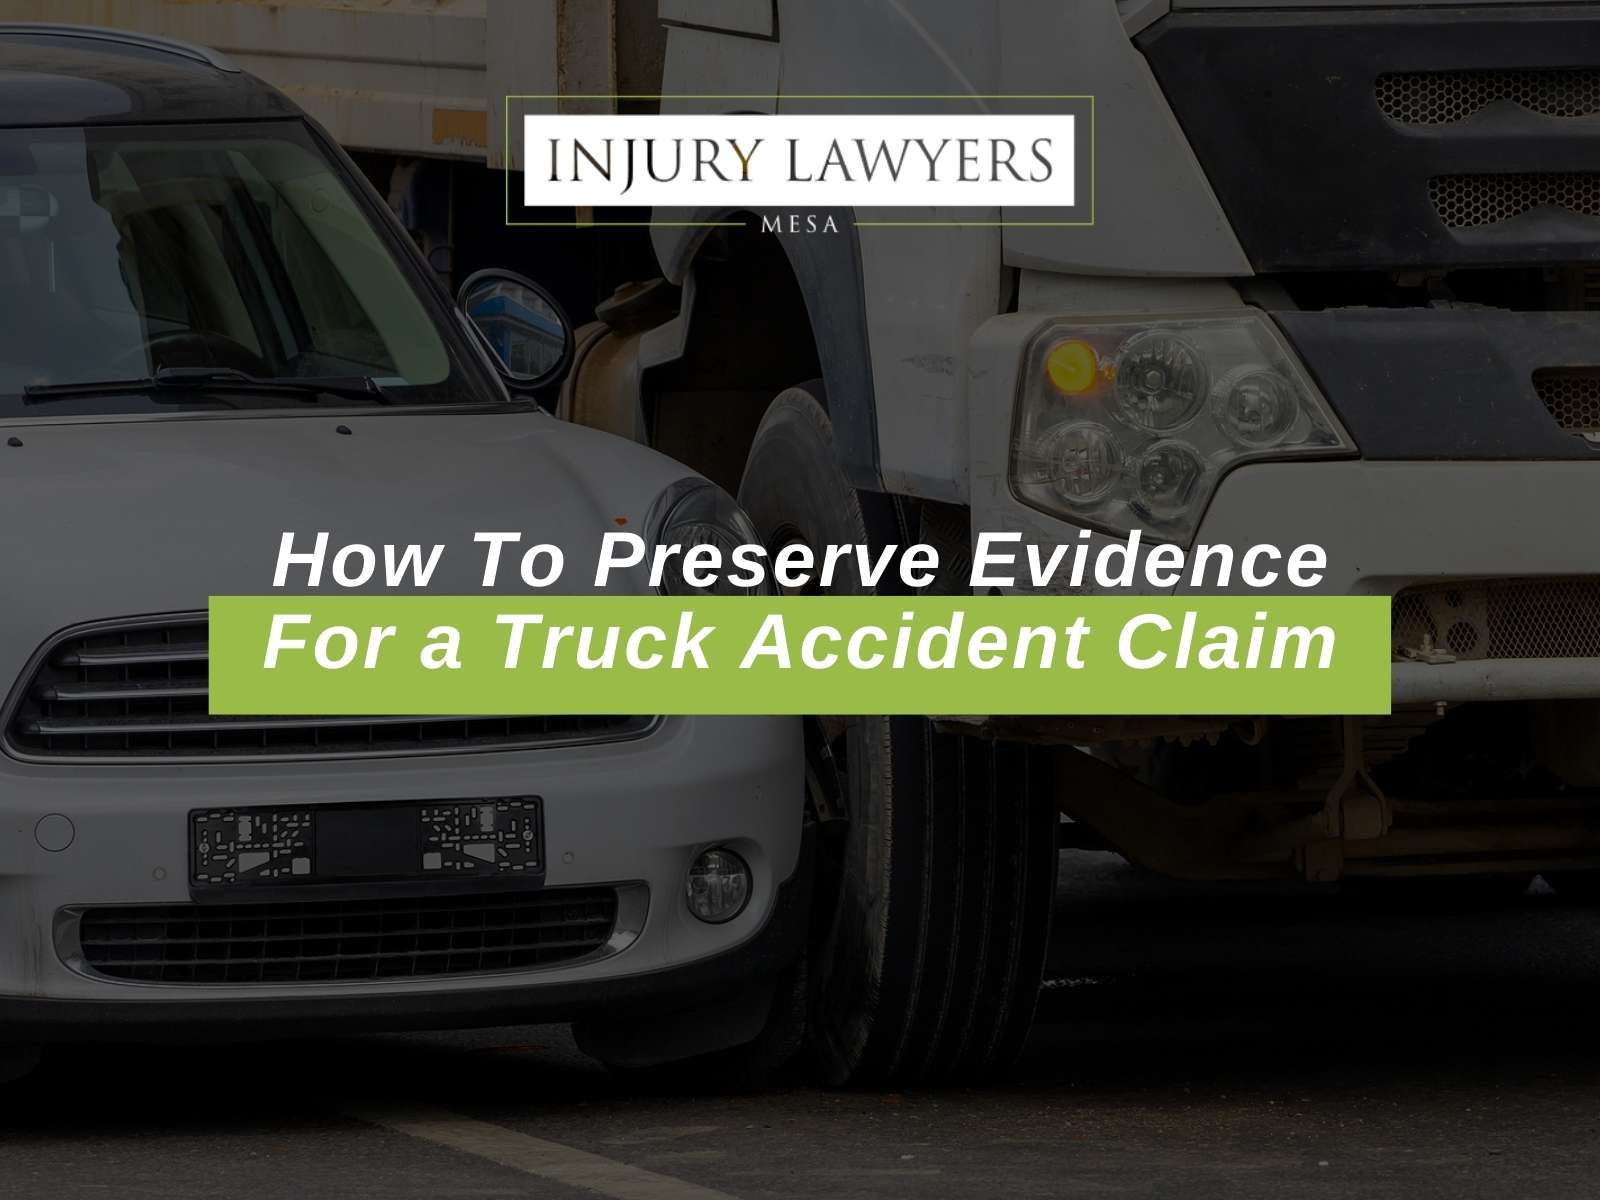 How To Preserve Evidence For a Truck Accident Claim